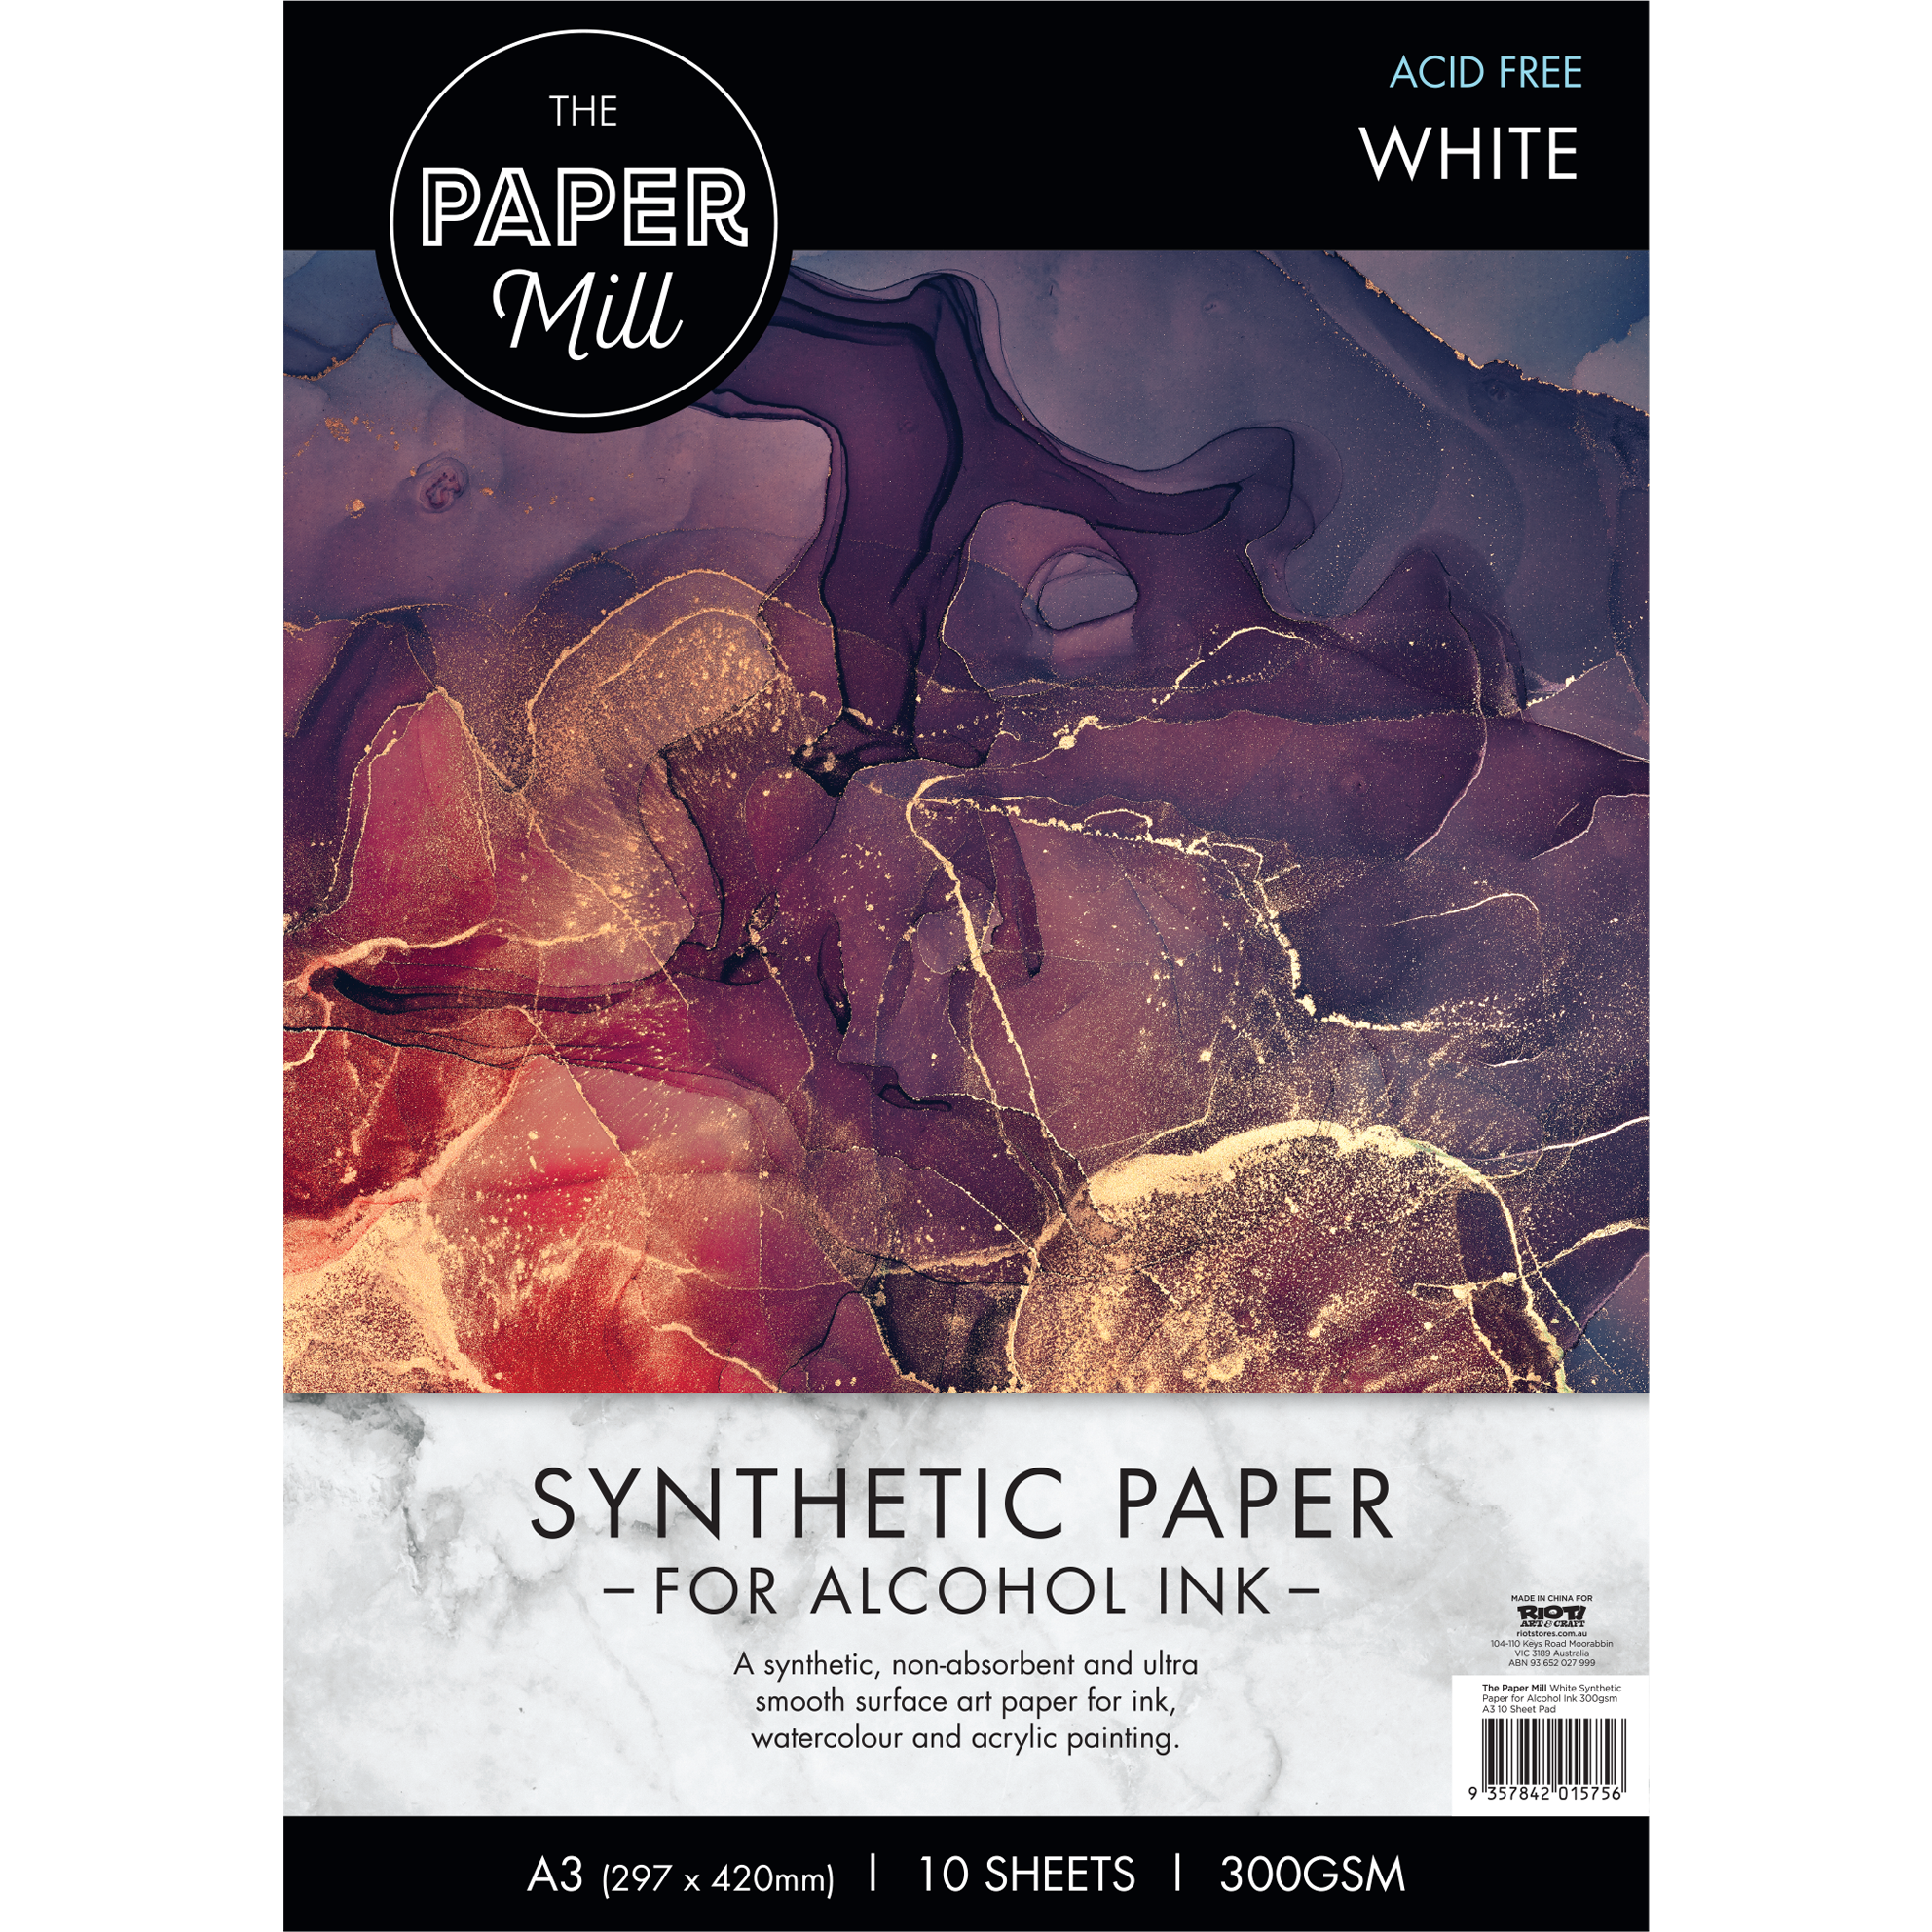 Image of The Paper Mill White Synthetic Paper for Alcohol Ink-A3, 300gsm (10 Sheets)